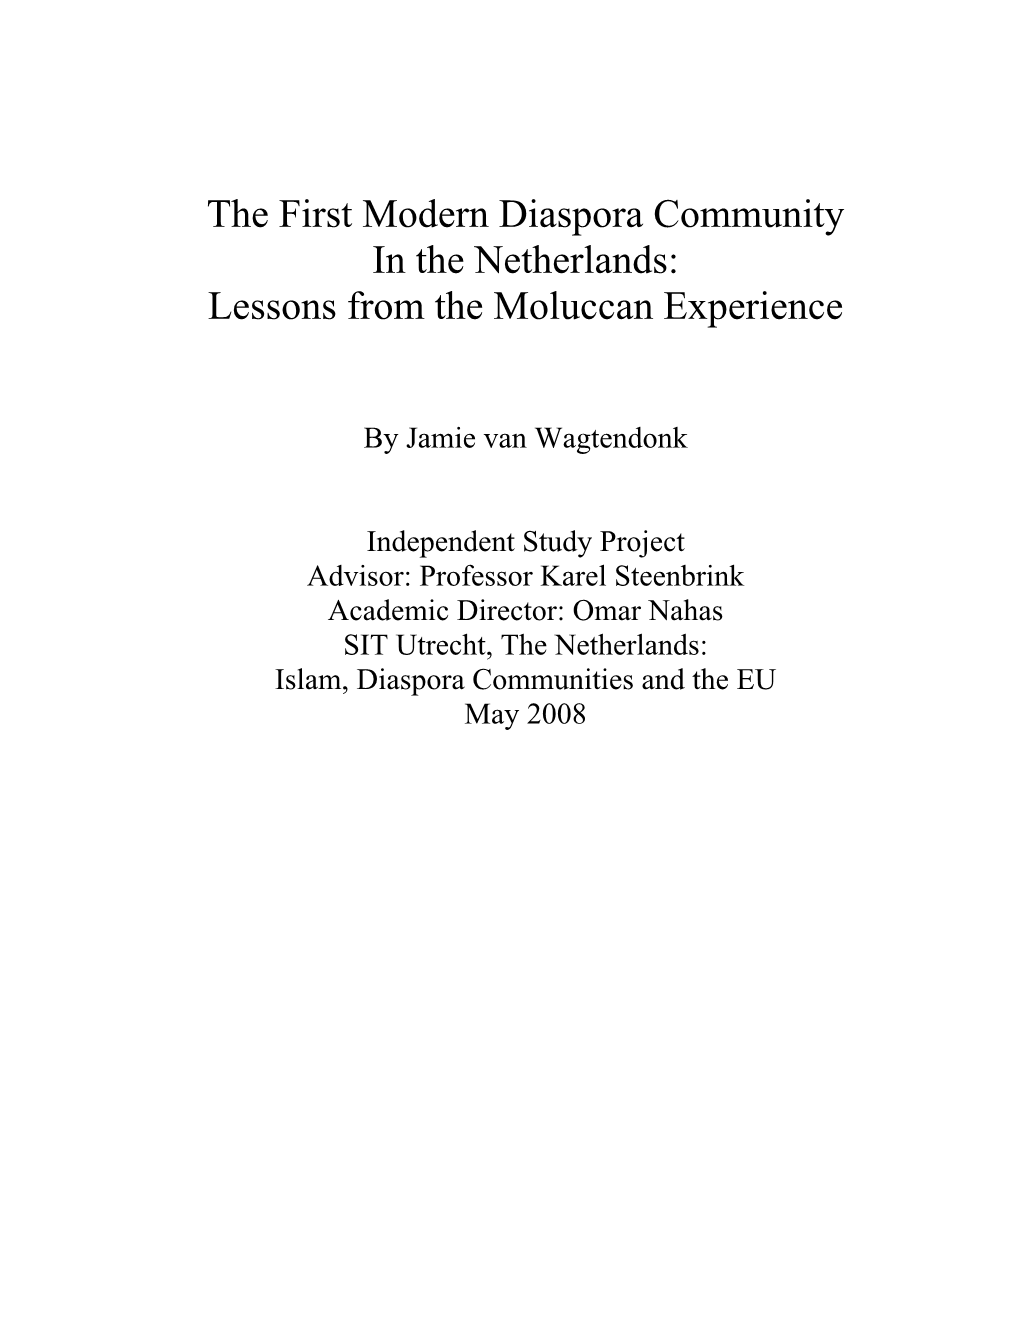 The First Modern Diaspora Community in the Netherlands: Lessons from the Moluccan Experience